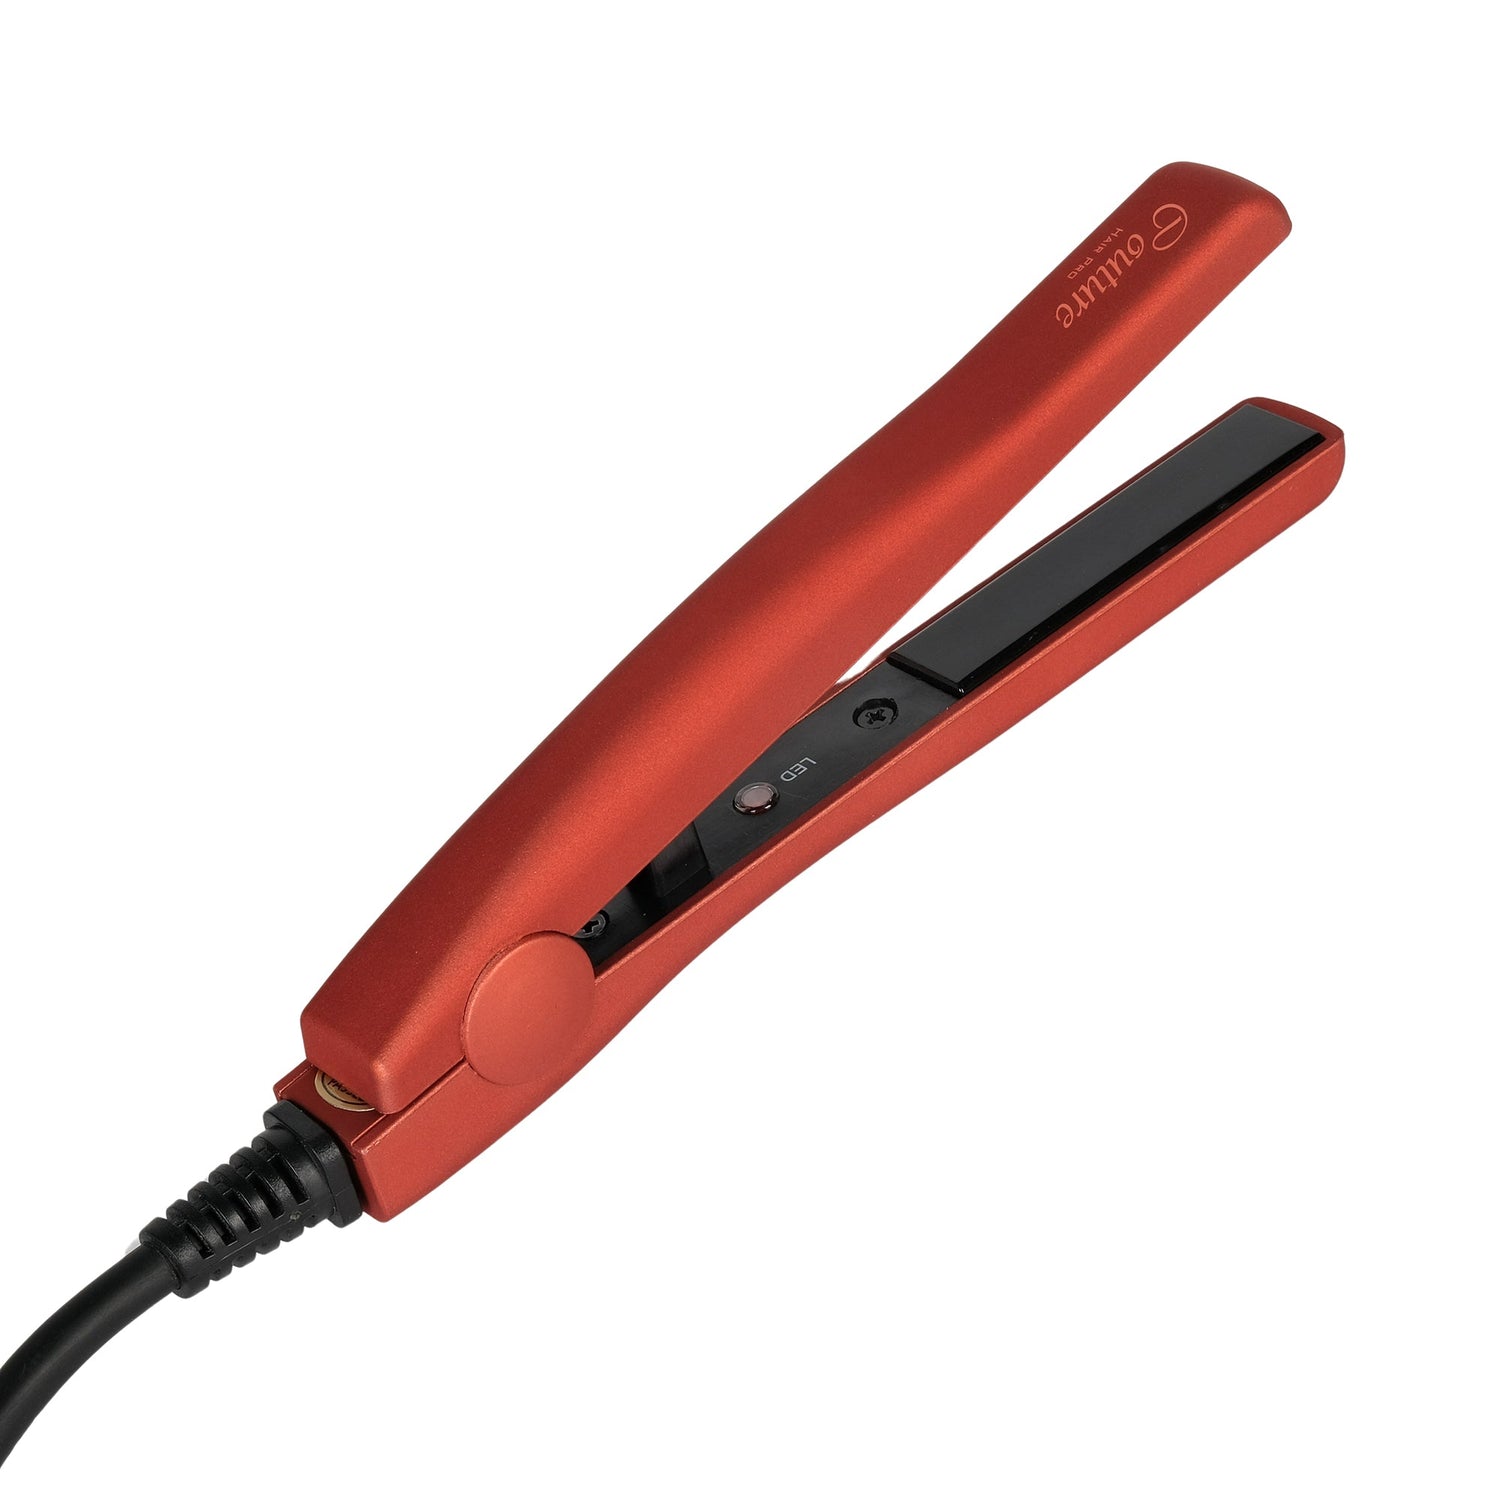 Couture Hair Pro Pure Ceramic Mini Flat Iron - Professional Mini Hair Straightener - Negative Ions More Shine and Less Frizz - Canadian Engineering - Couture Hair Pro